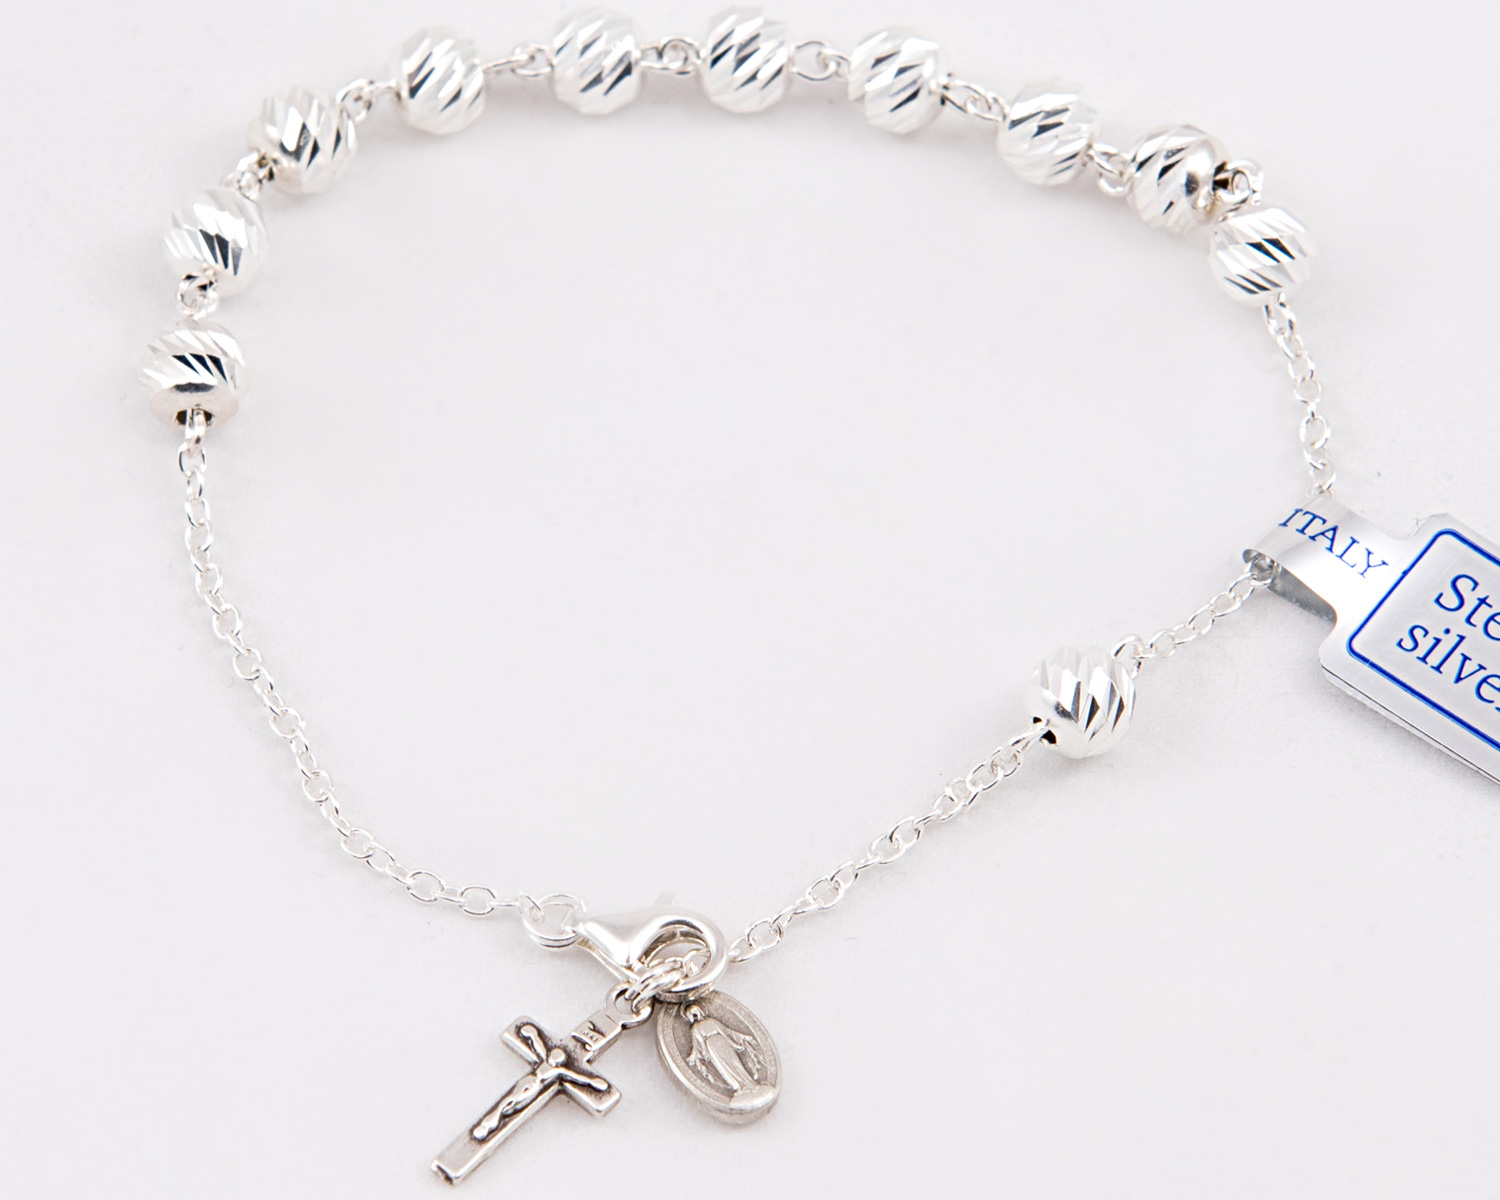 DIRECT FROM LOURDES - 8 Way Single Decade Blue Rosary Bracelet